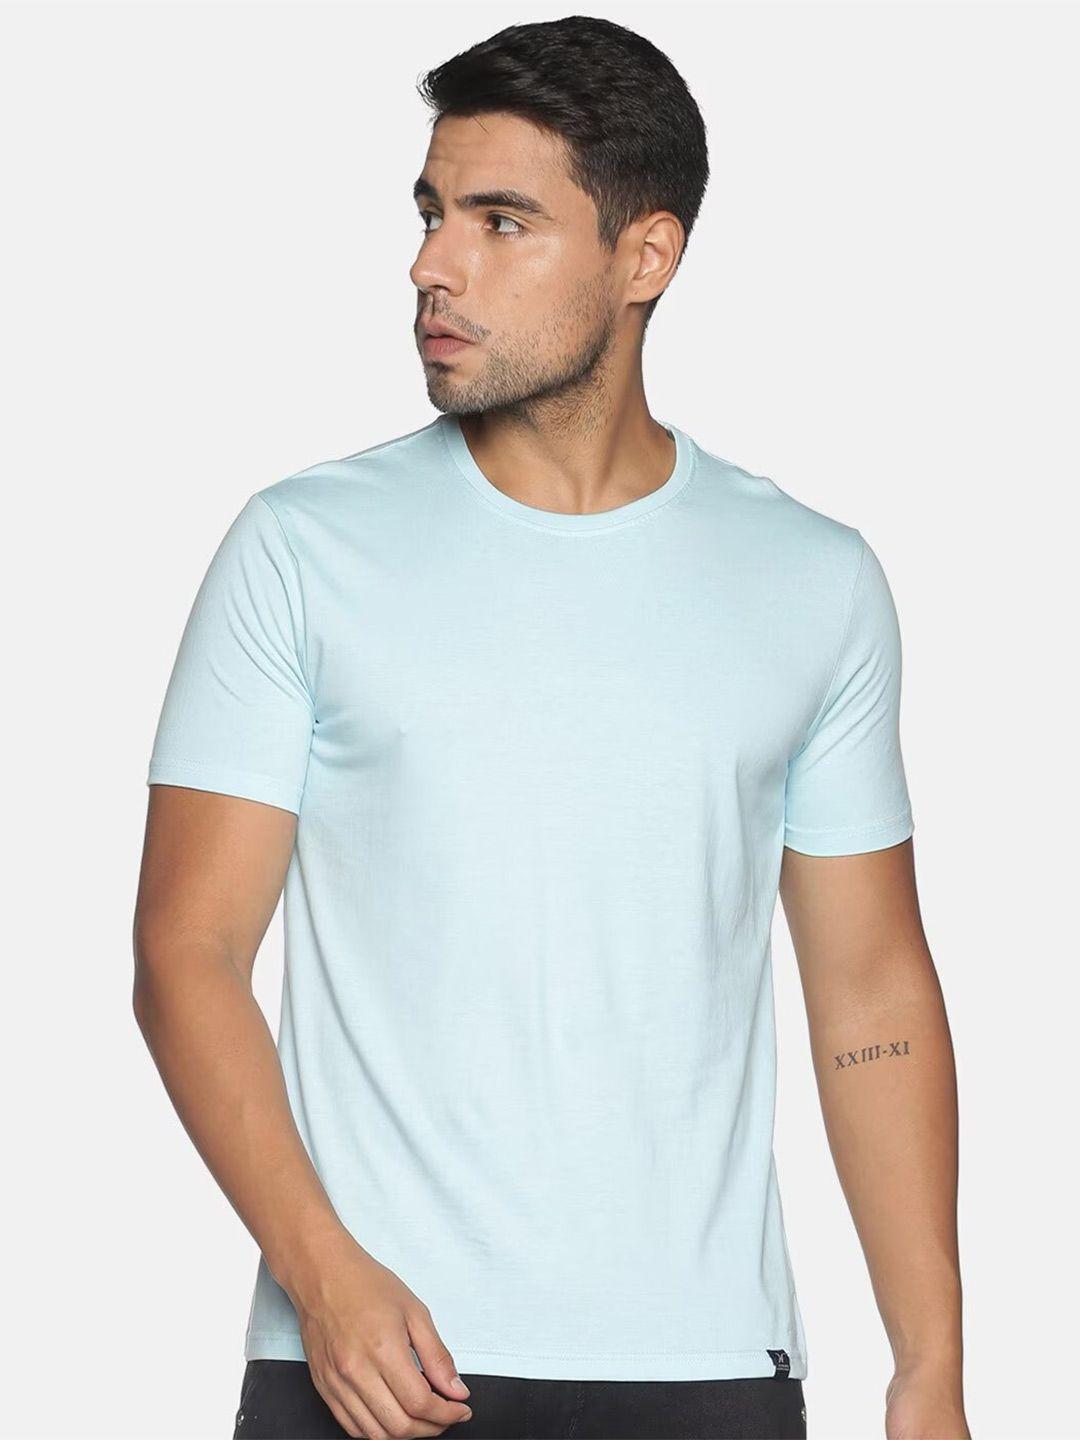 the hollander round neck short sleeves pure cotton t-shirt